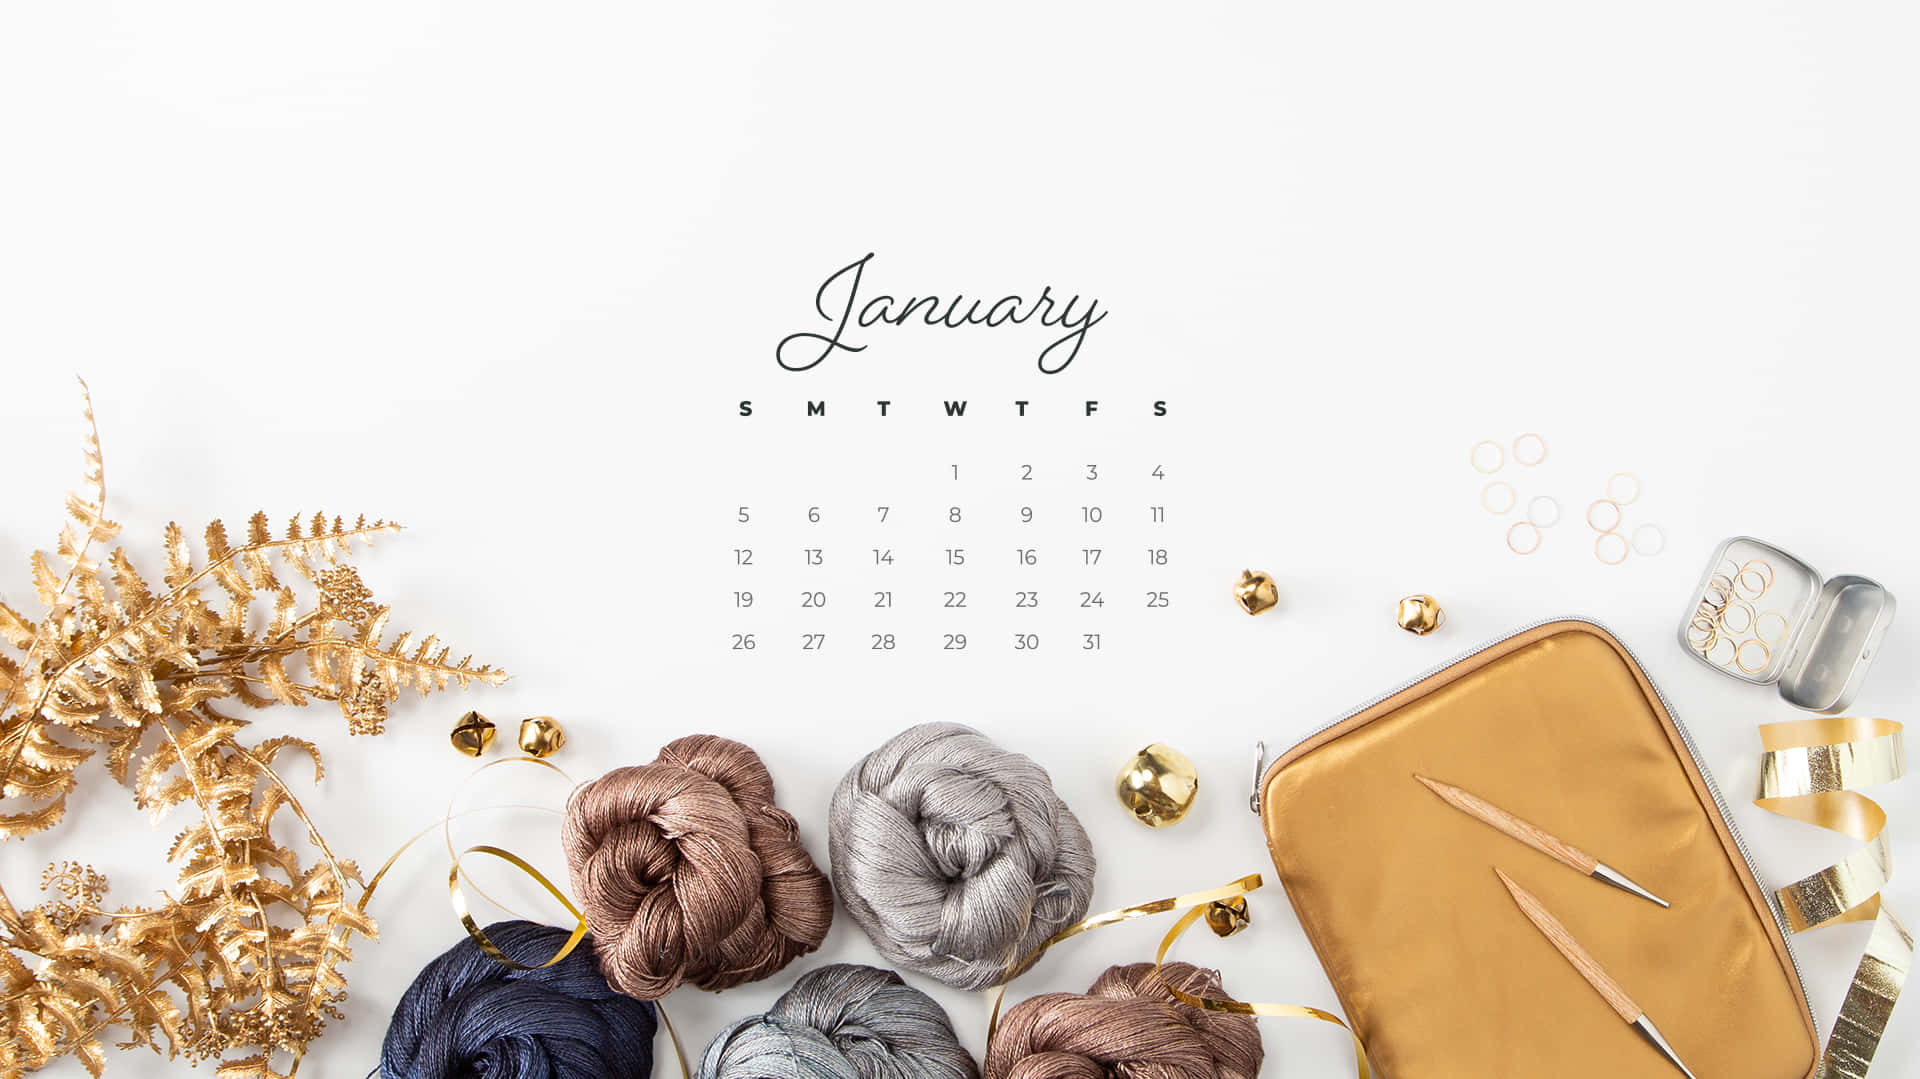 Welcome to January, the month of New Beginnings! Wallpaper